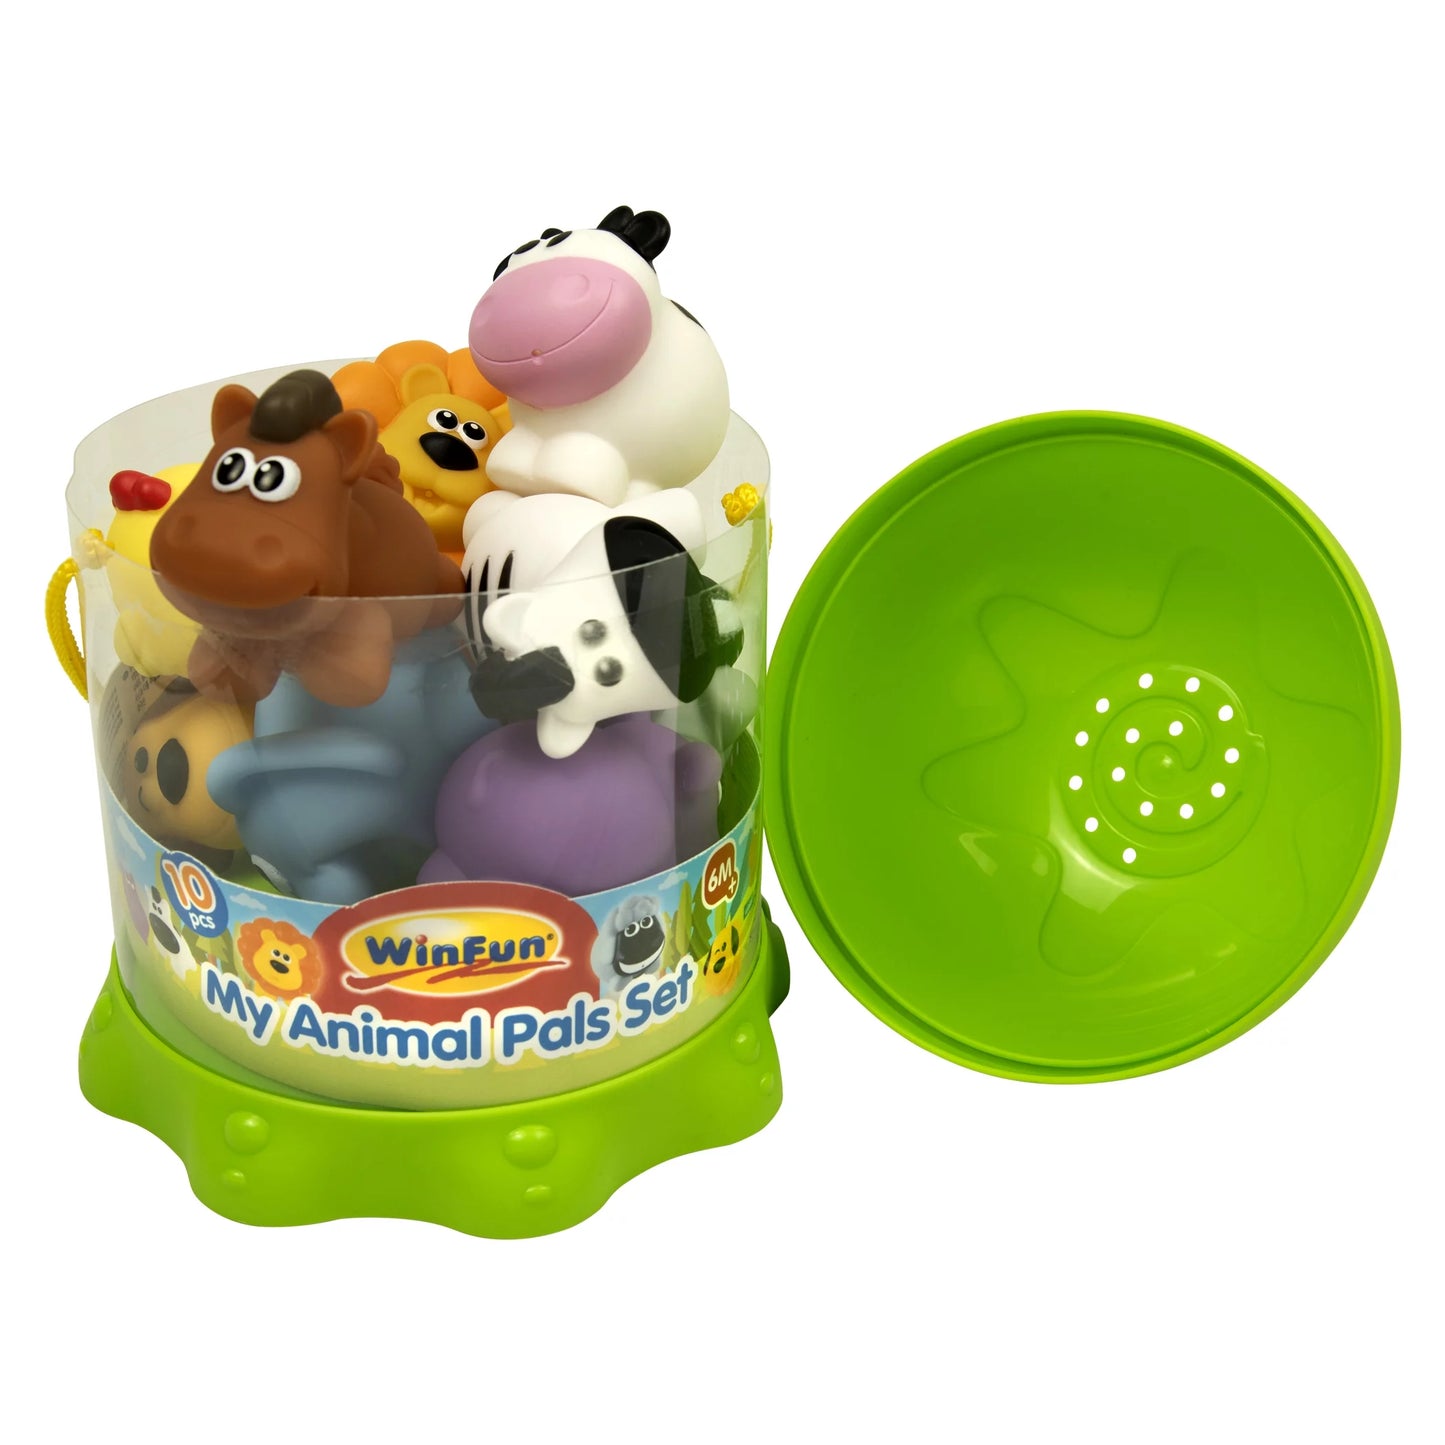 10 Pc. My Animals Bath Playset -Recommended for Ages 6 Months or Up